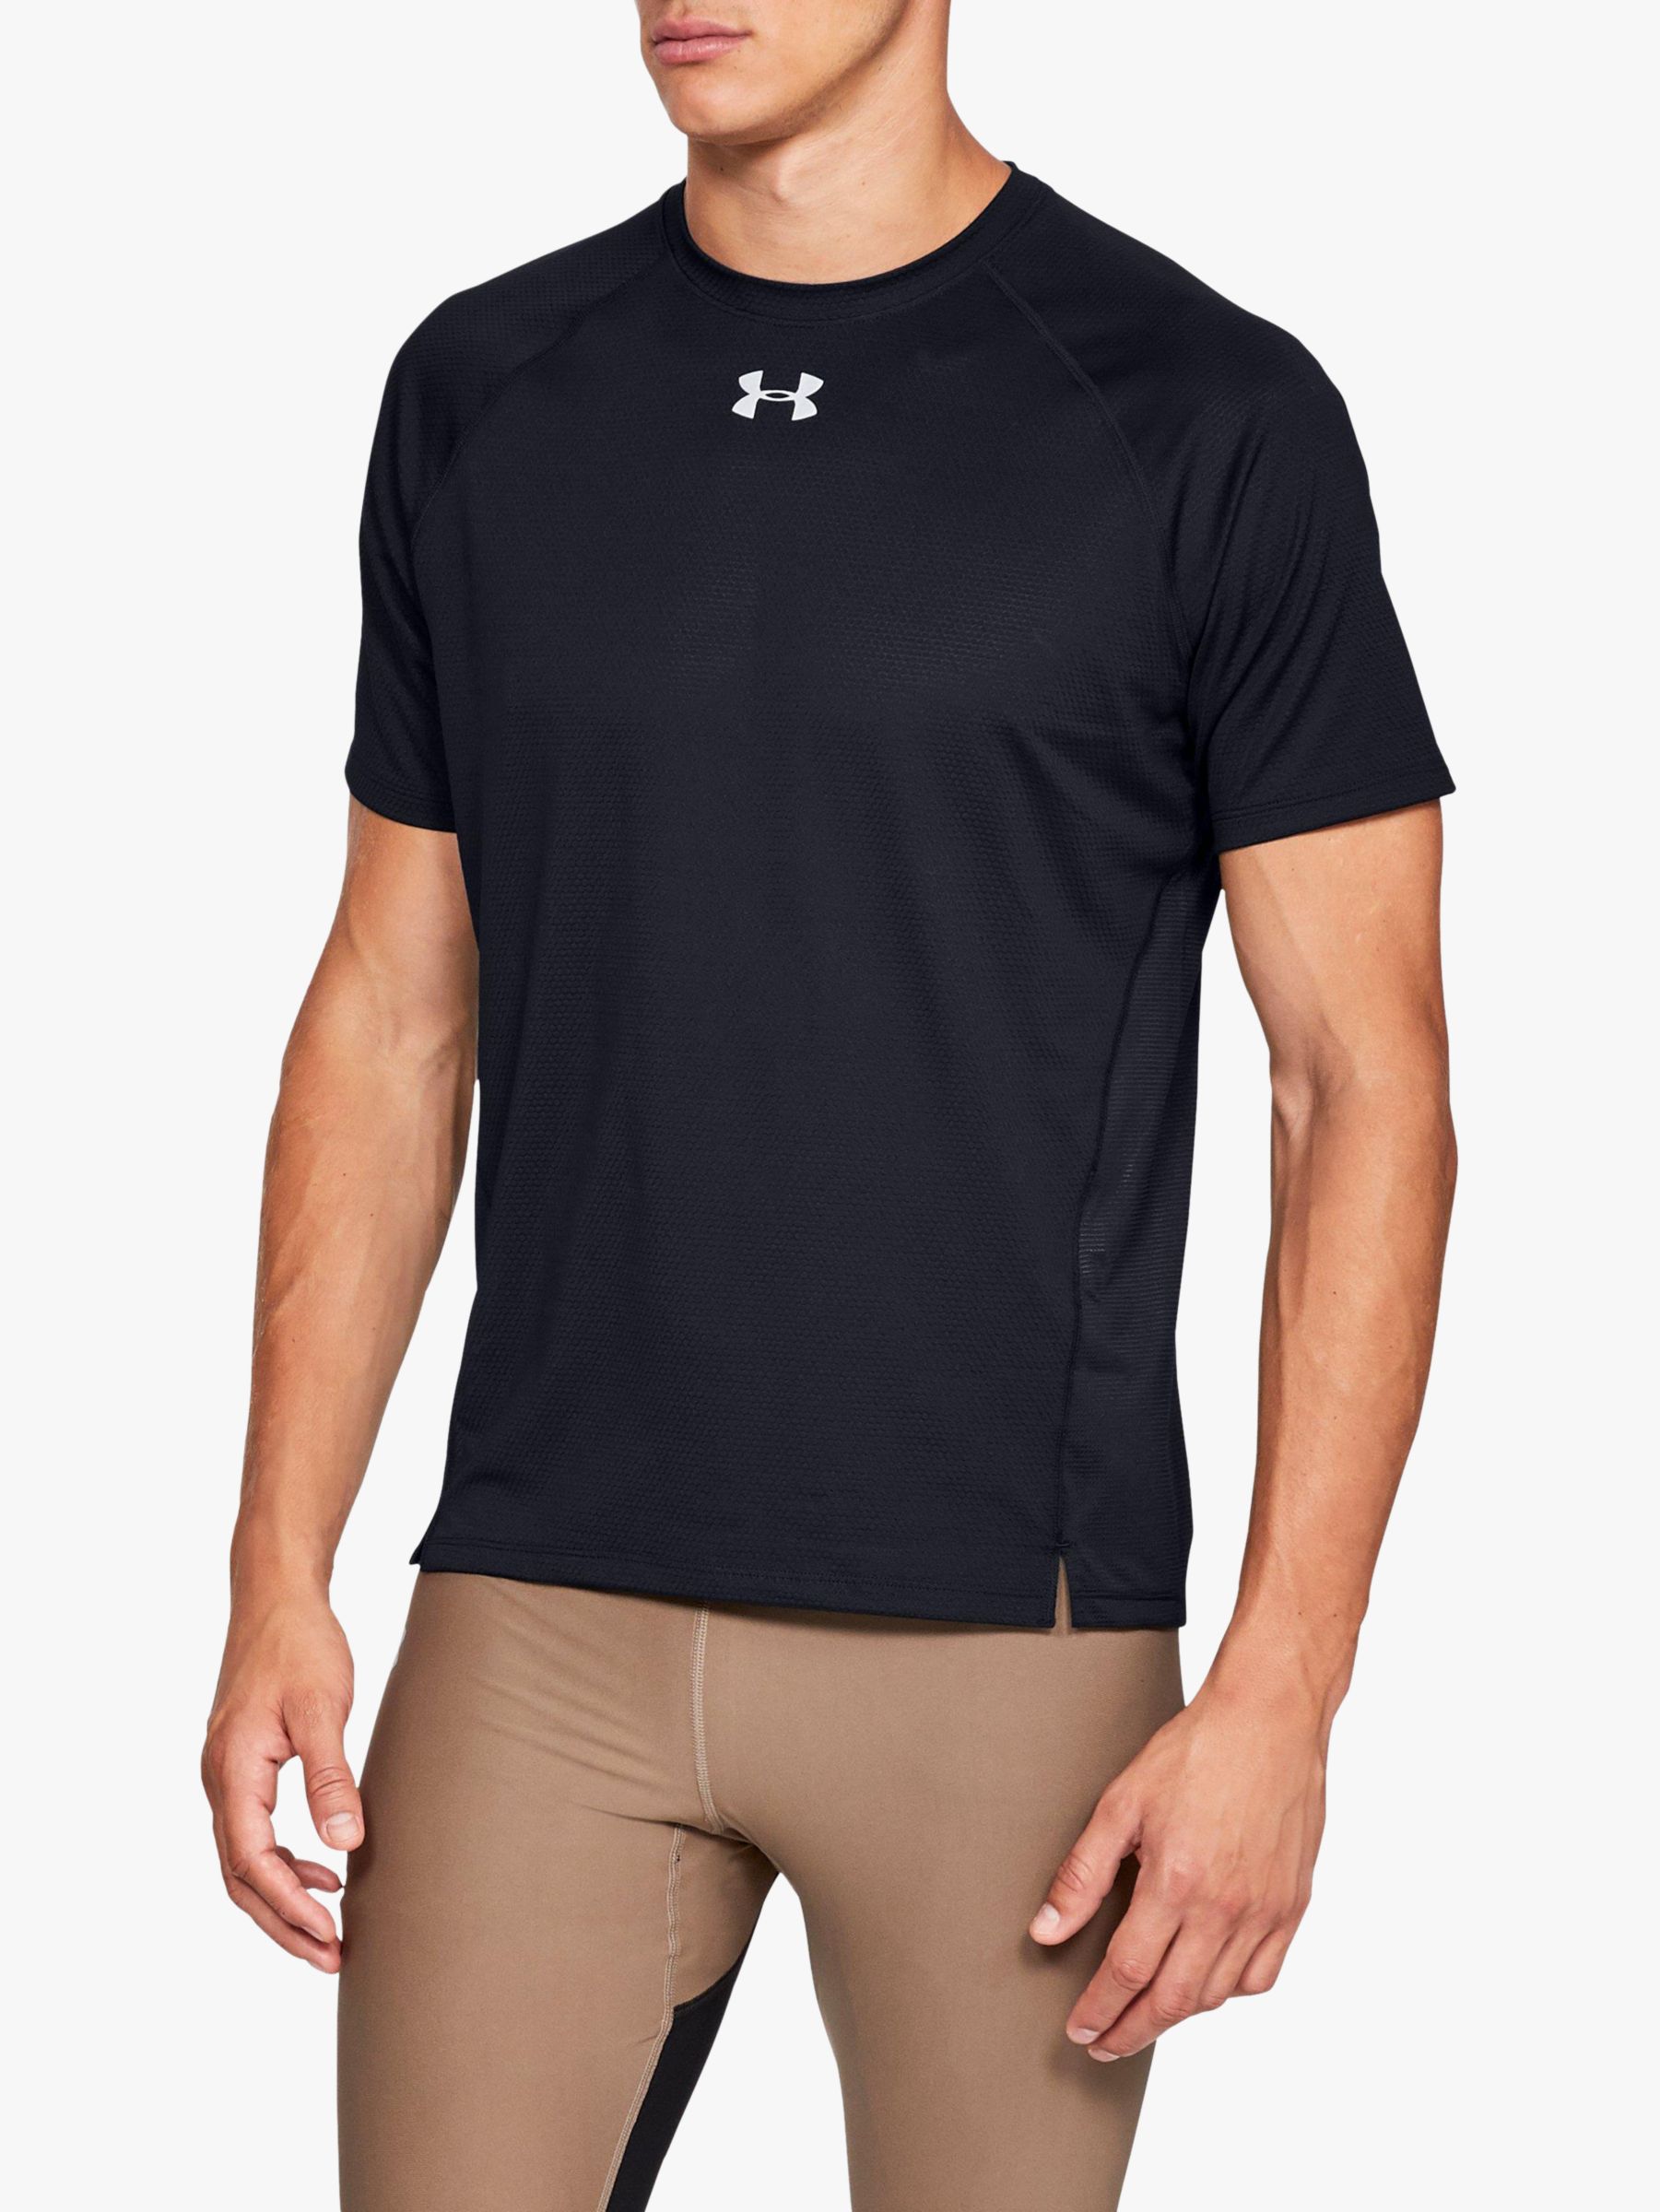 buy under armour t shirt